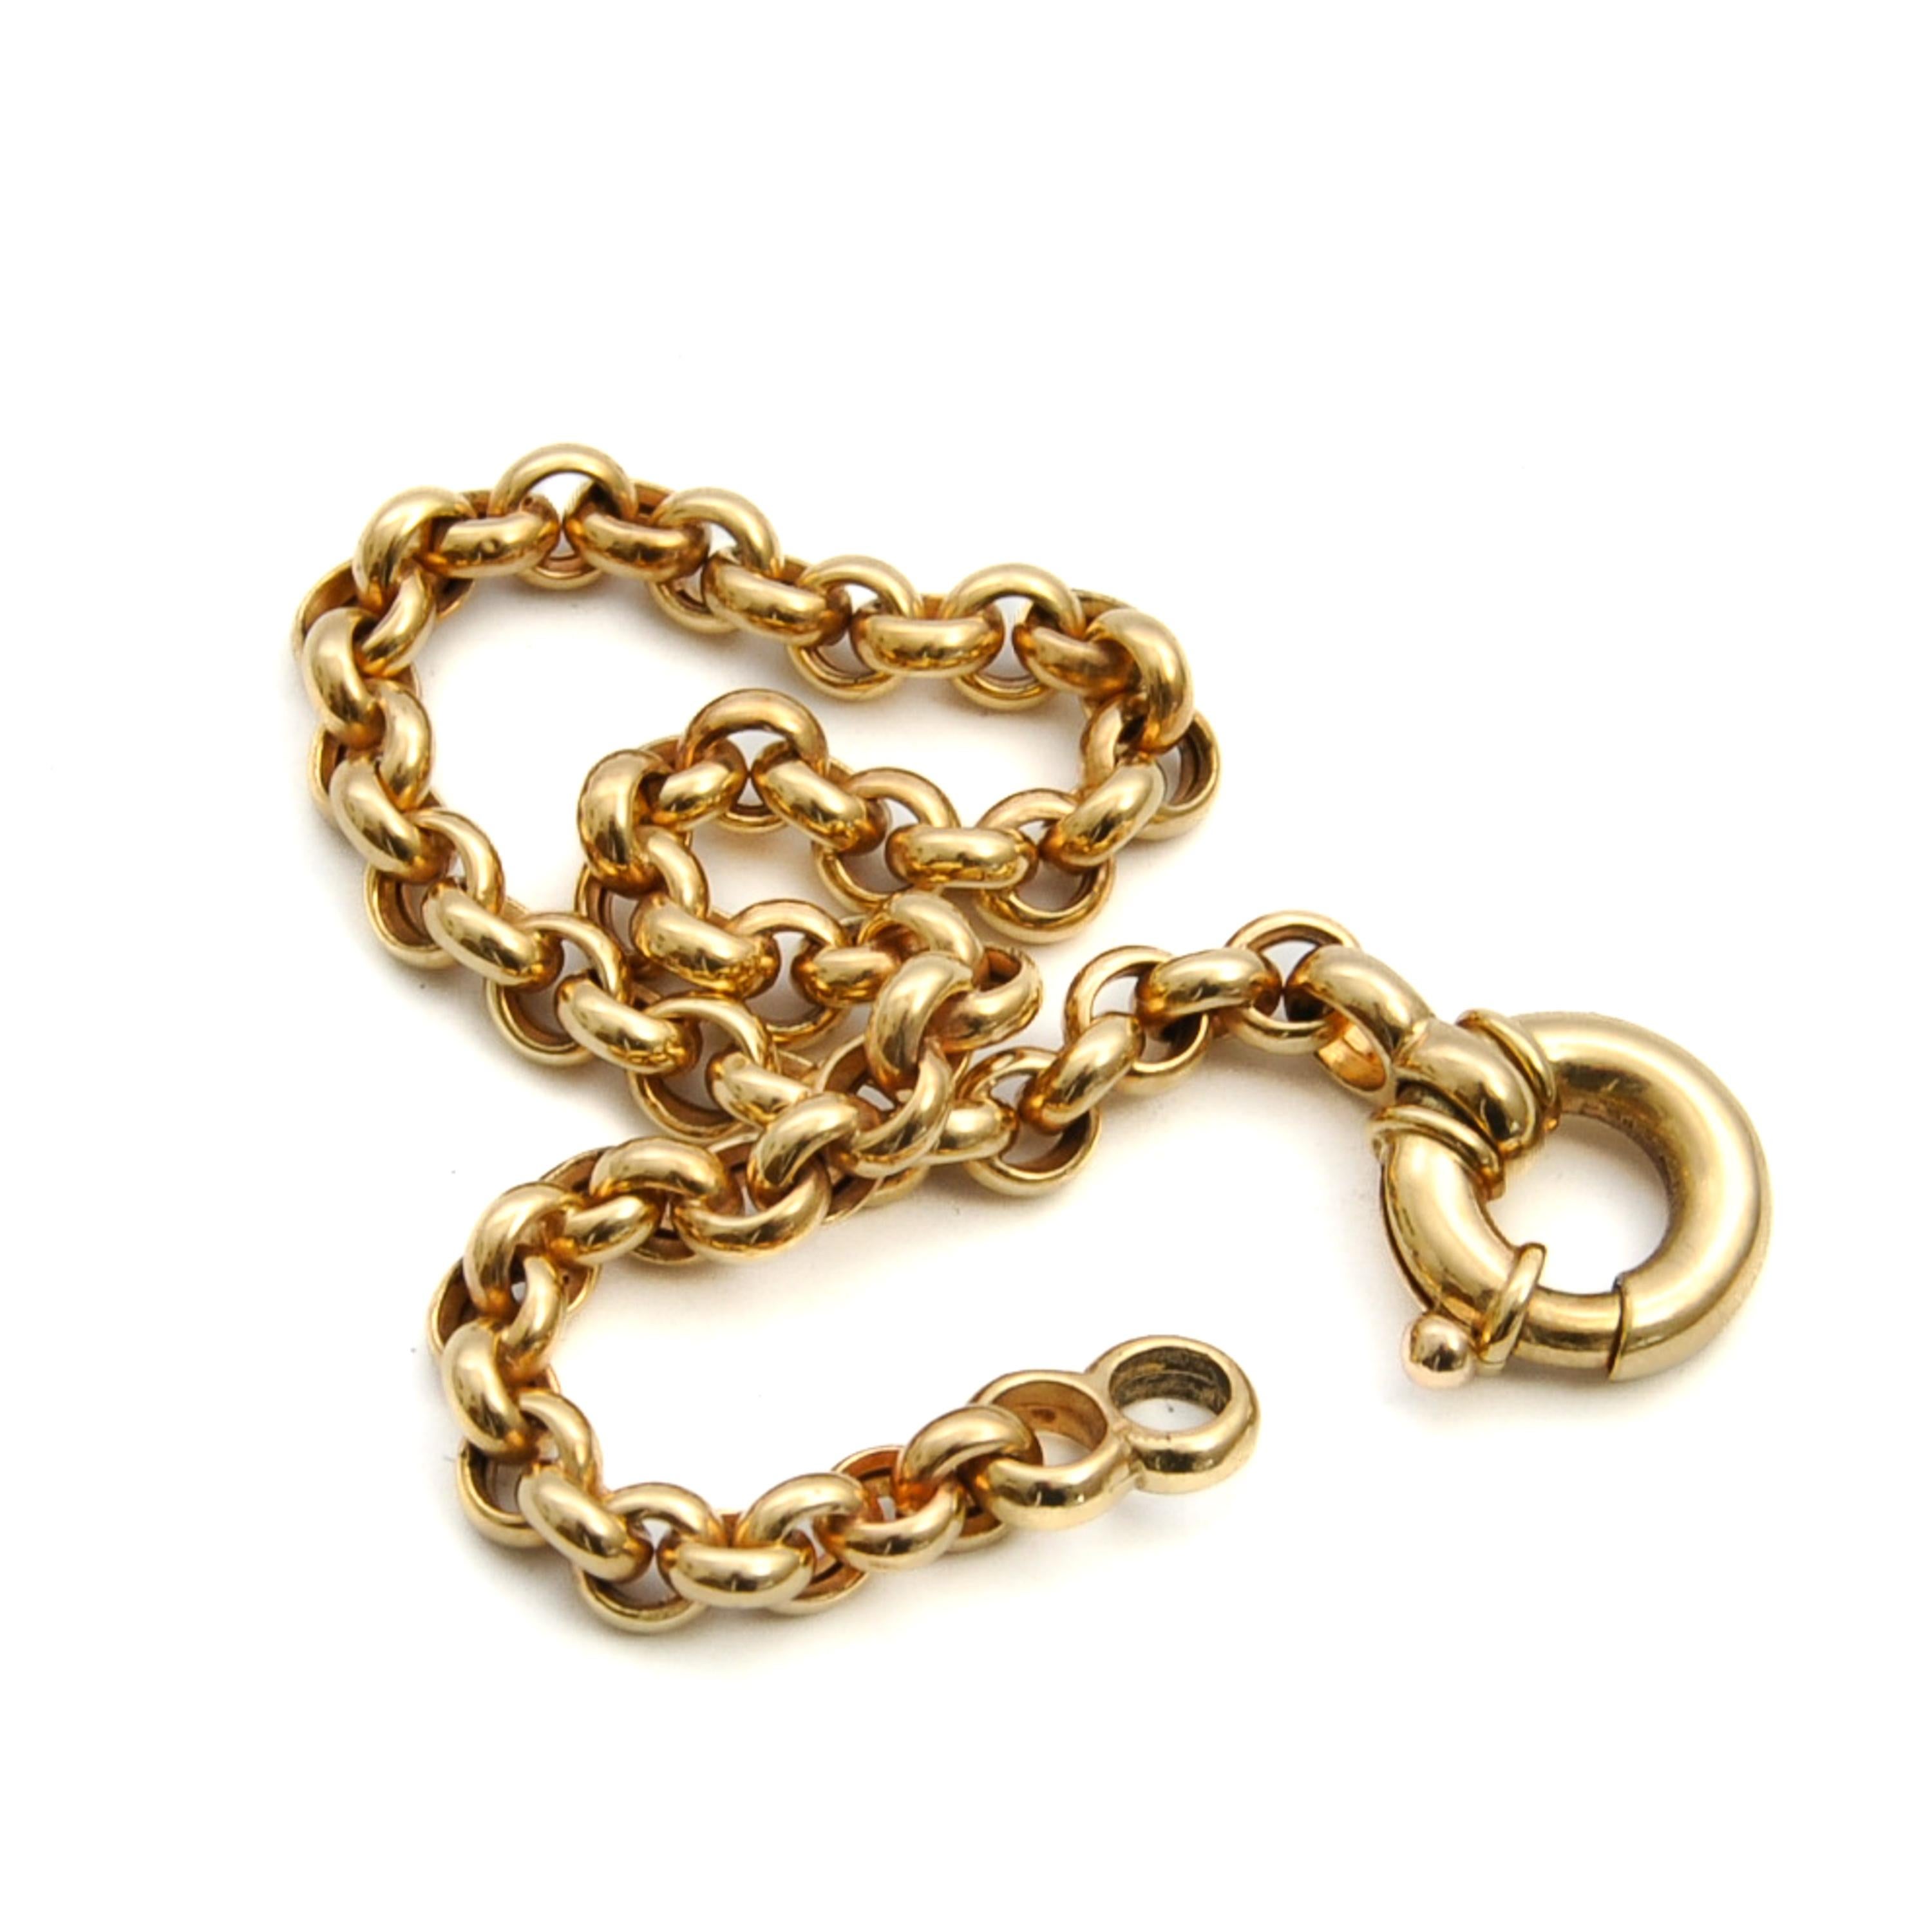 A lovely vintage 14 karat gold sailor spring ring rolo chain bracelet. Each round link has a perfect polish and the links woven together into this beautiful chain. The bracelet is ready to wear alone or layered with your other favorite bracelets,